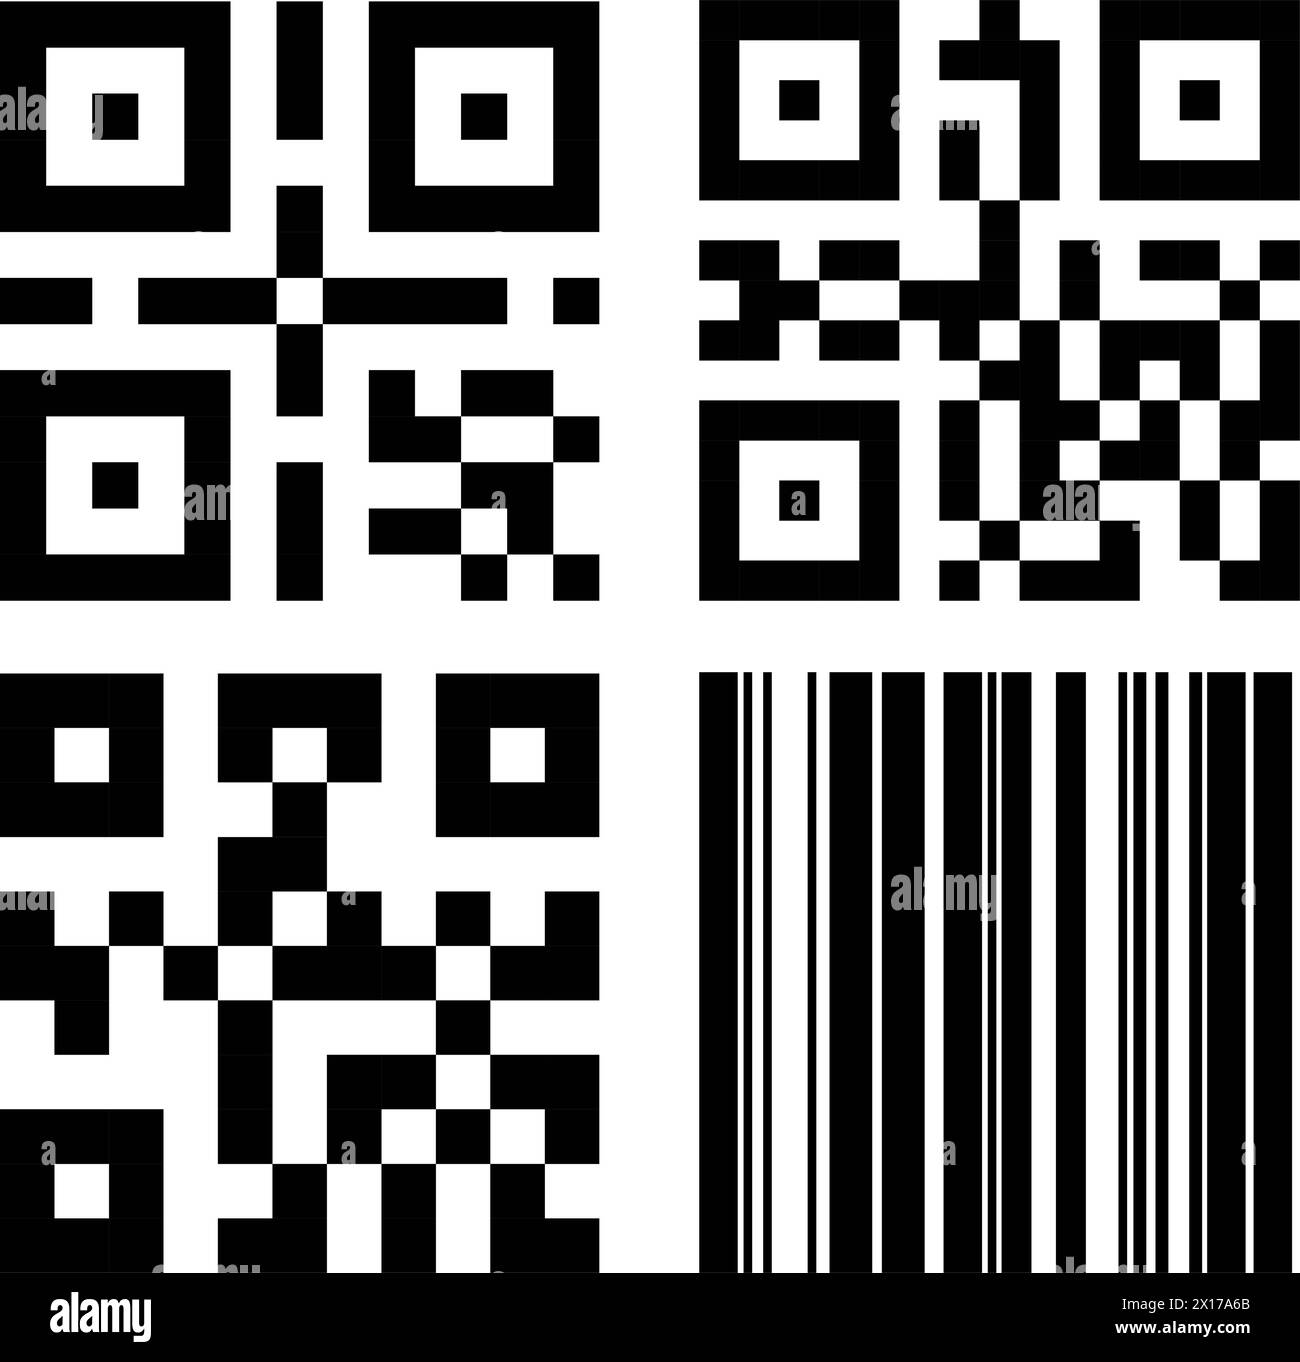 vector qr codes and bar code isolated on white background. supermarket scan qr codes Stock Vector